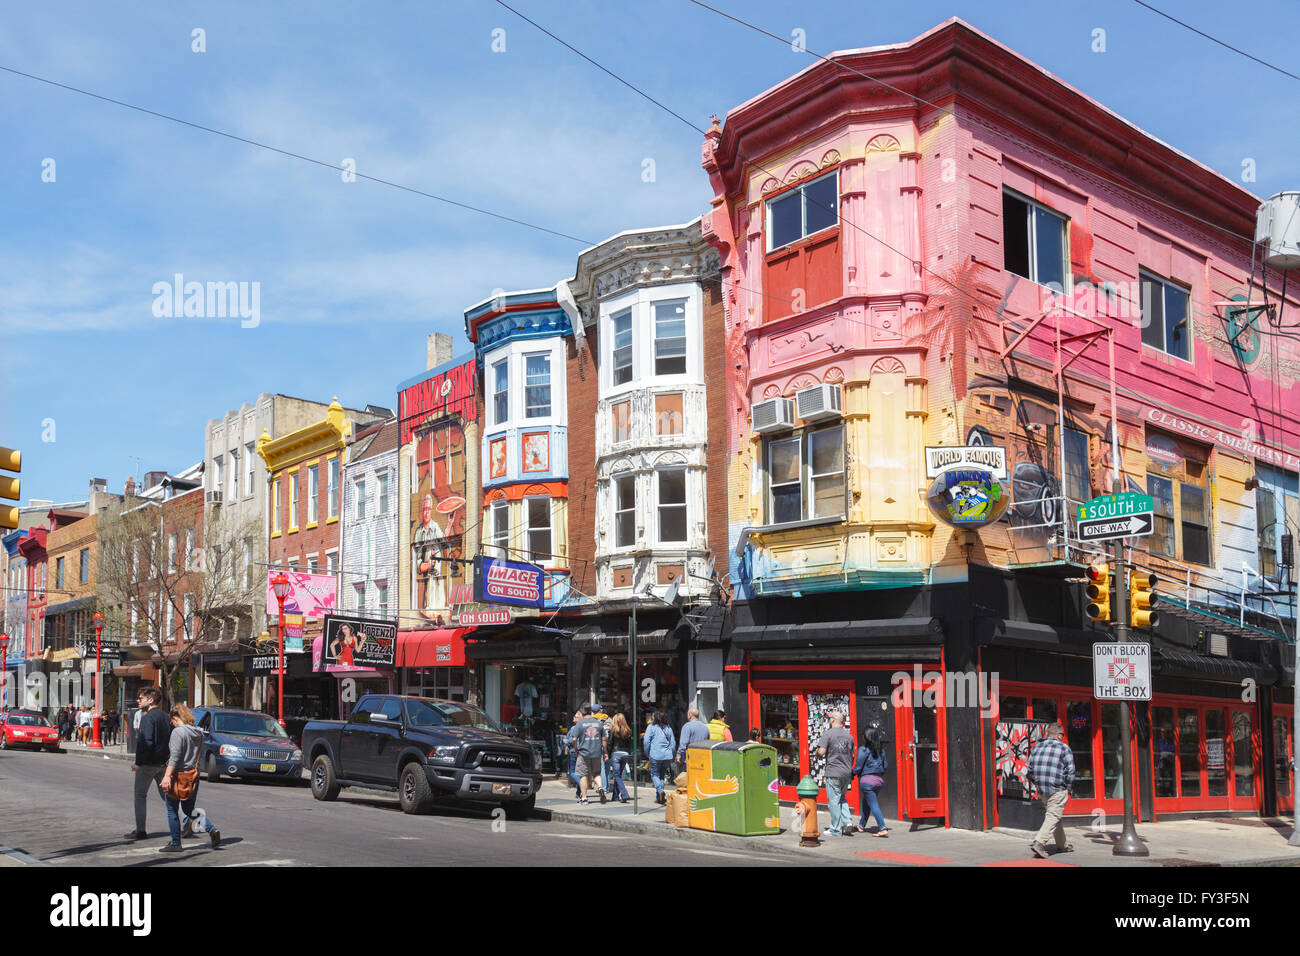 Colorful storefronts on South Street, Queen Village, Philadelphia